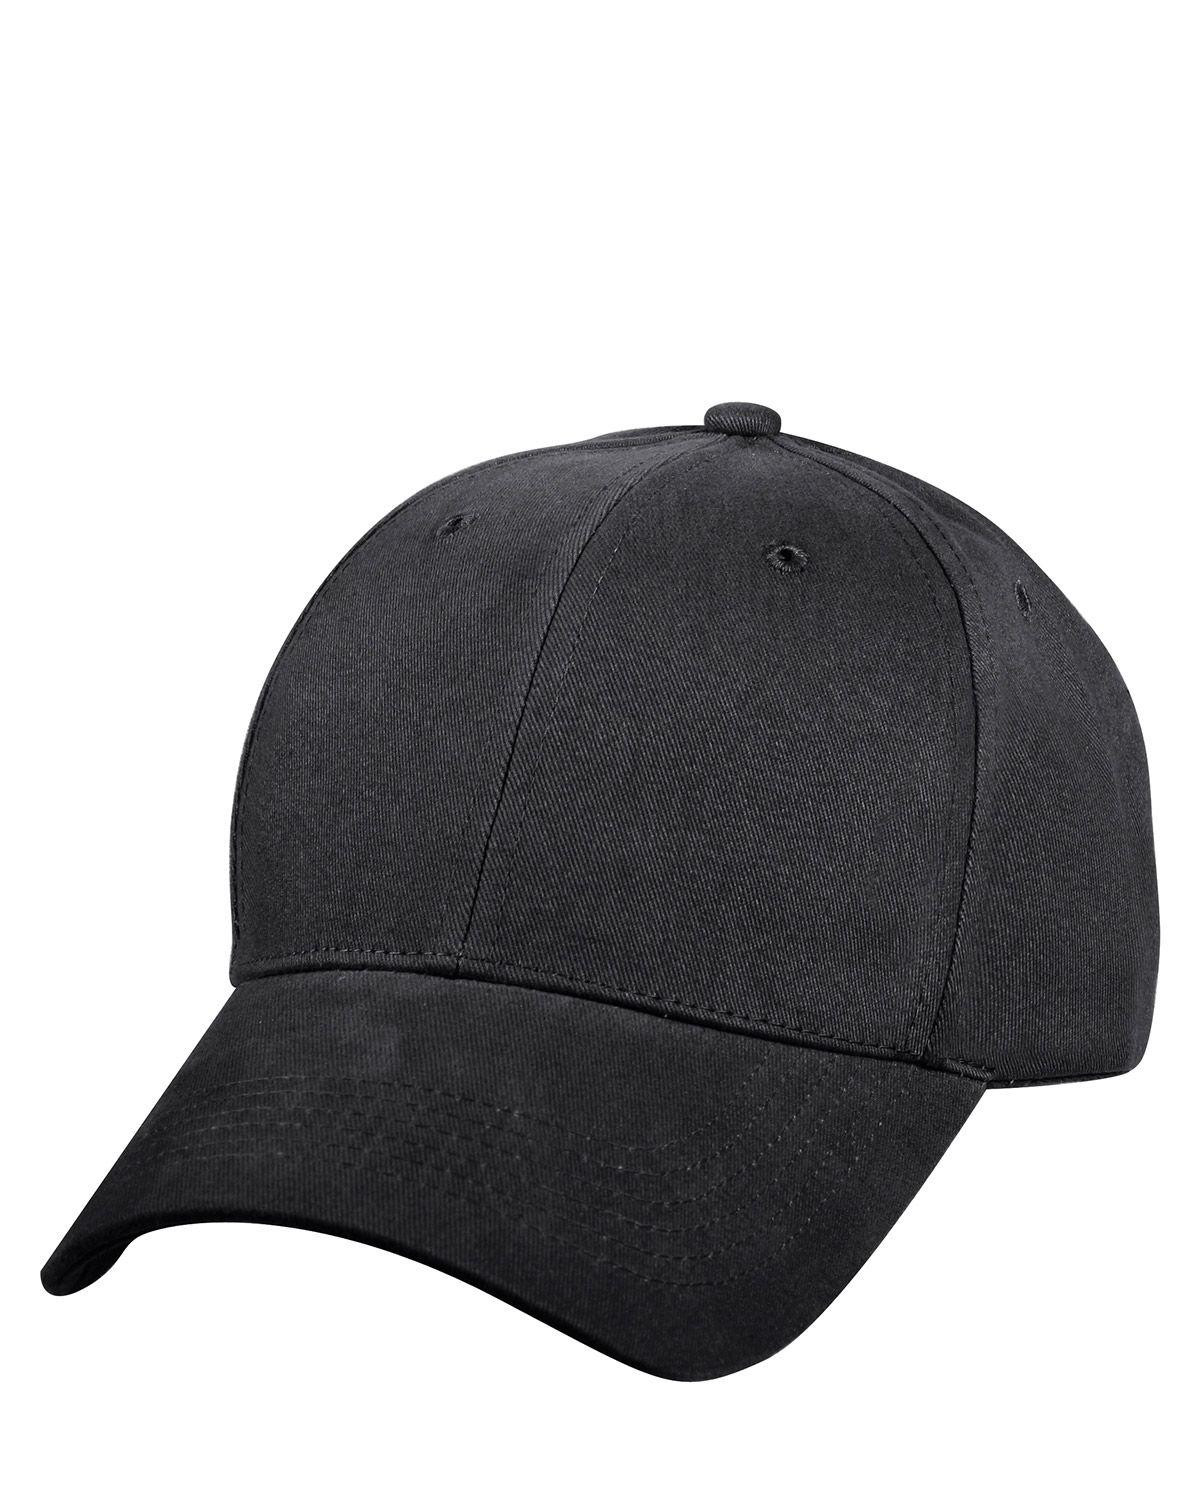 Rothco Supreme Low Profile Cap (Sort, One Size)